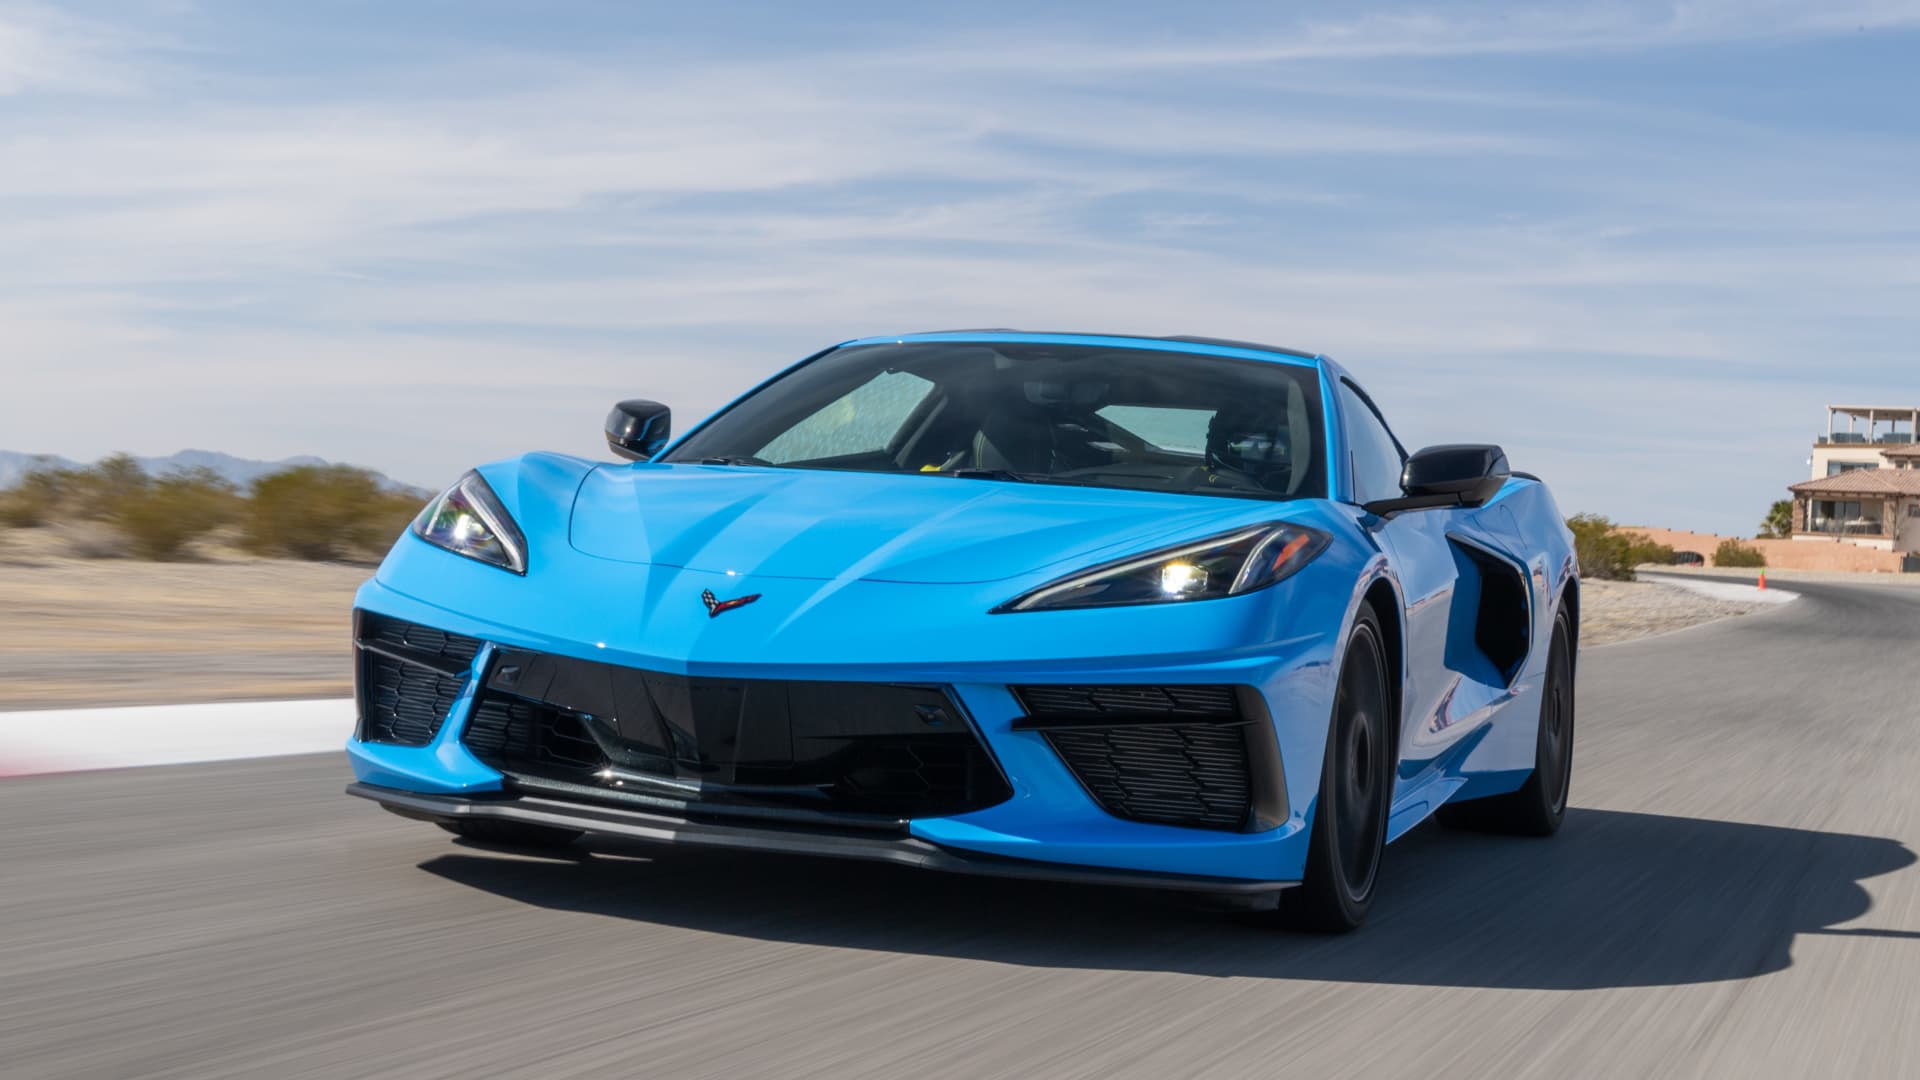 GM says it will produce electric Chevrolet Corvettes — CNBC